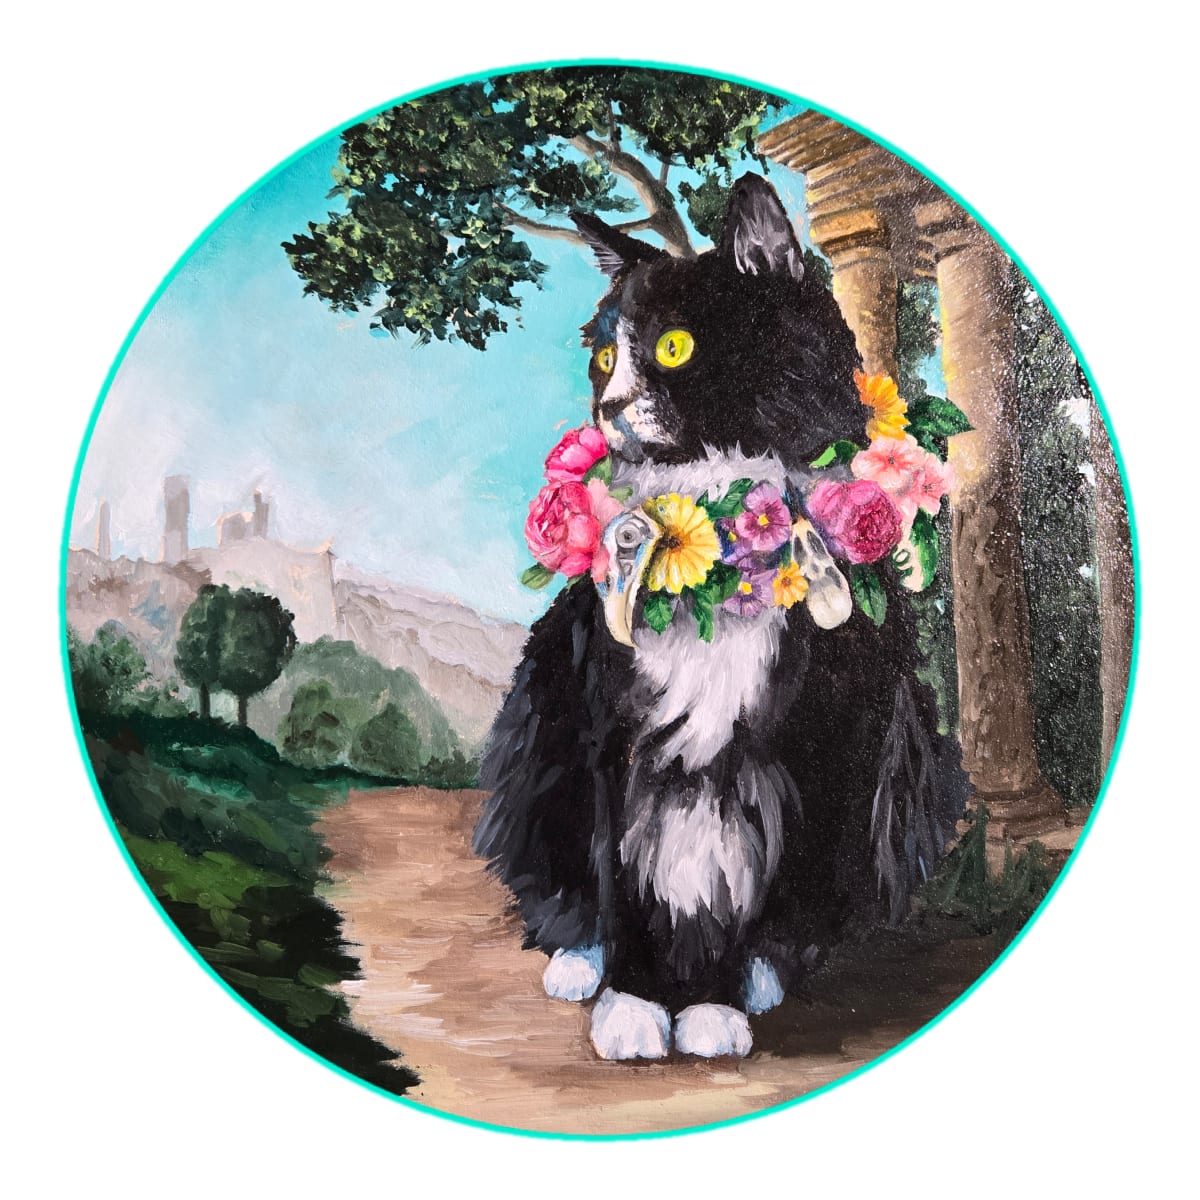 Catverse by Catherine Mills  Image: Catverse, Oil on round panel, 12 inches diameter